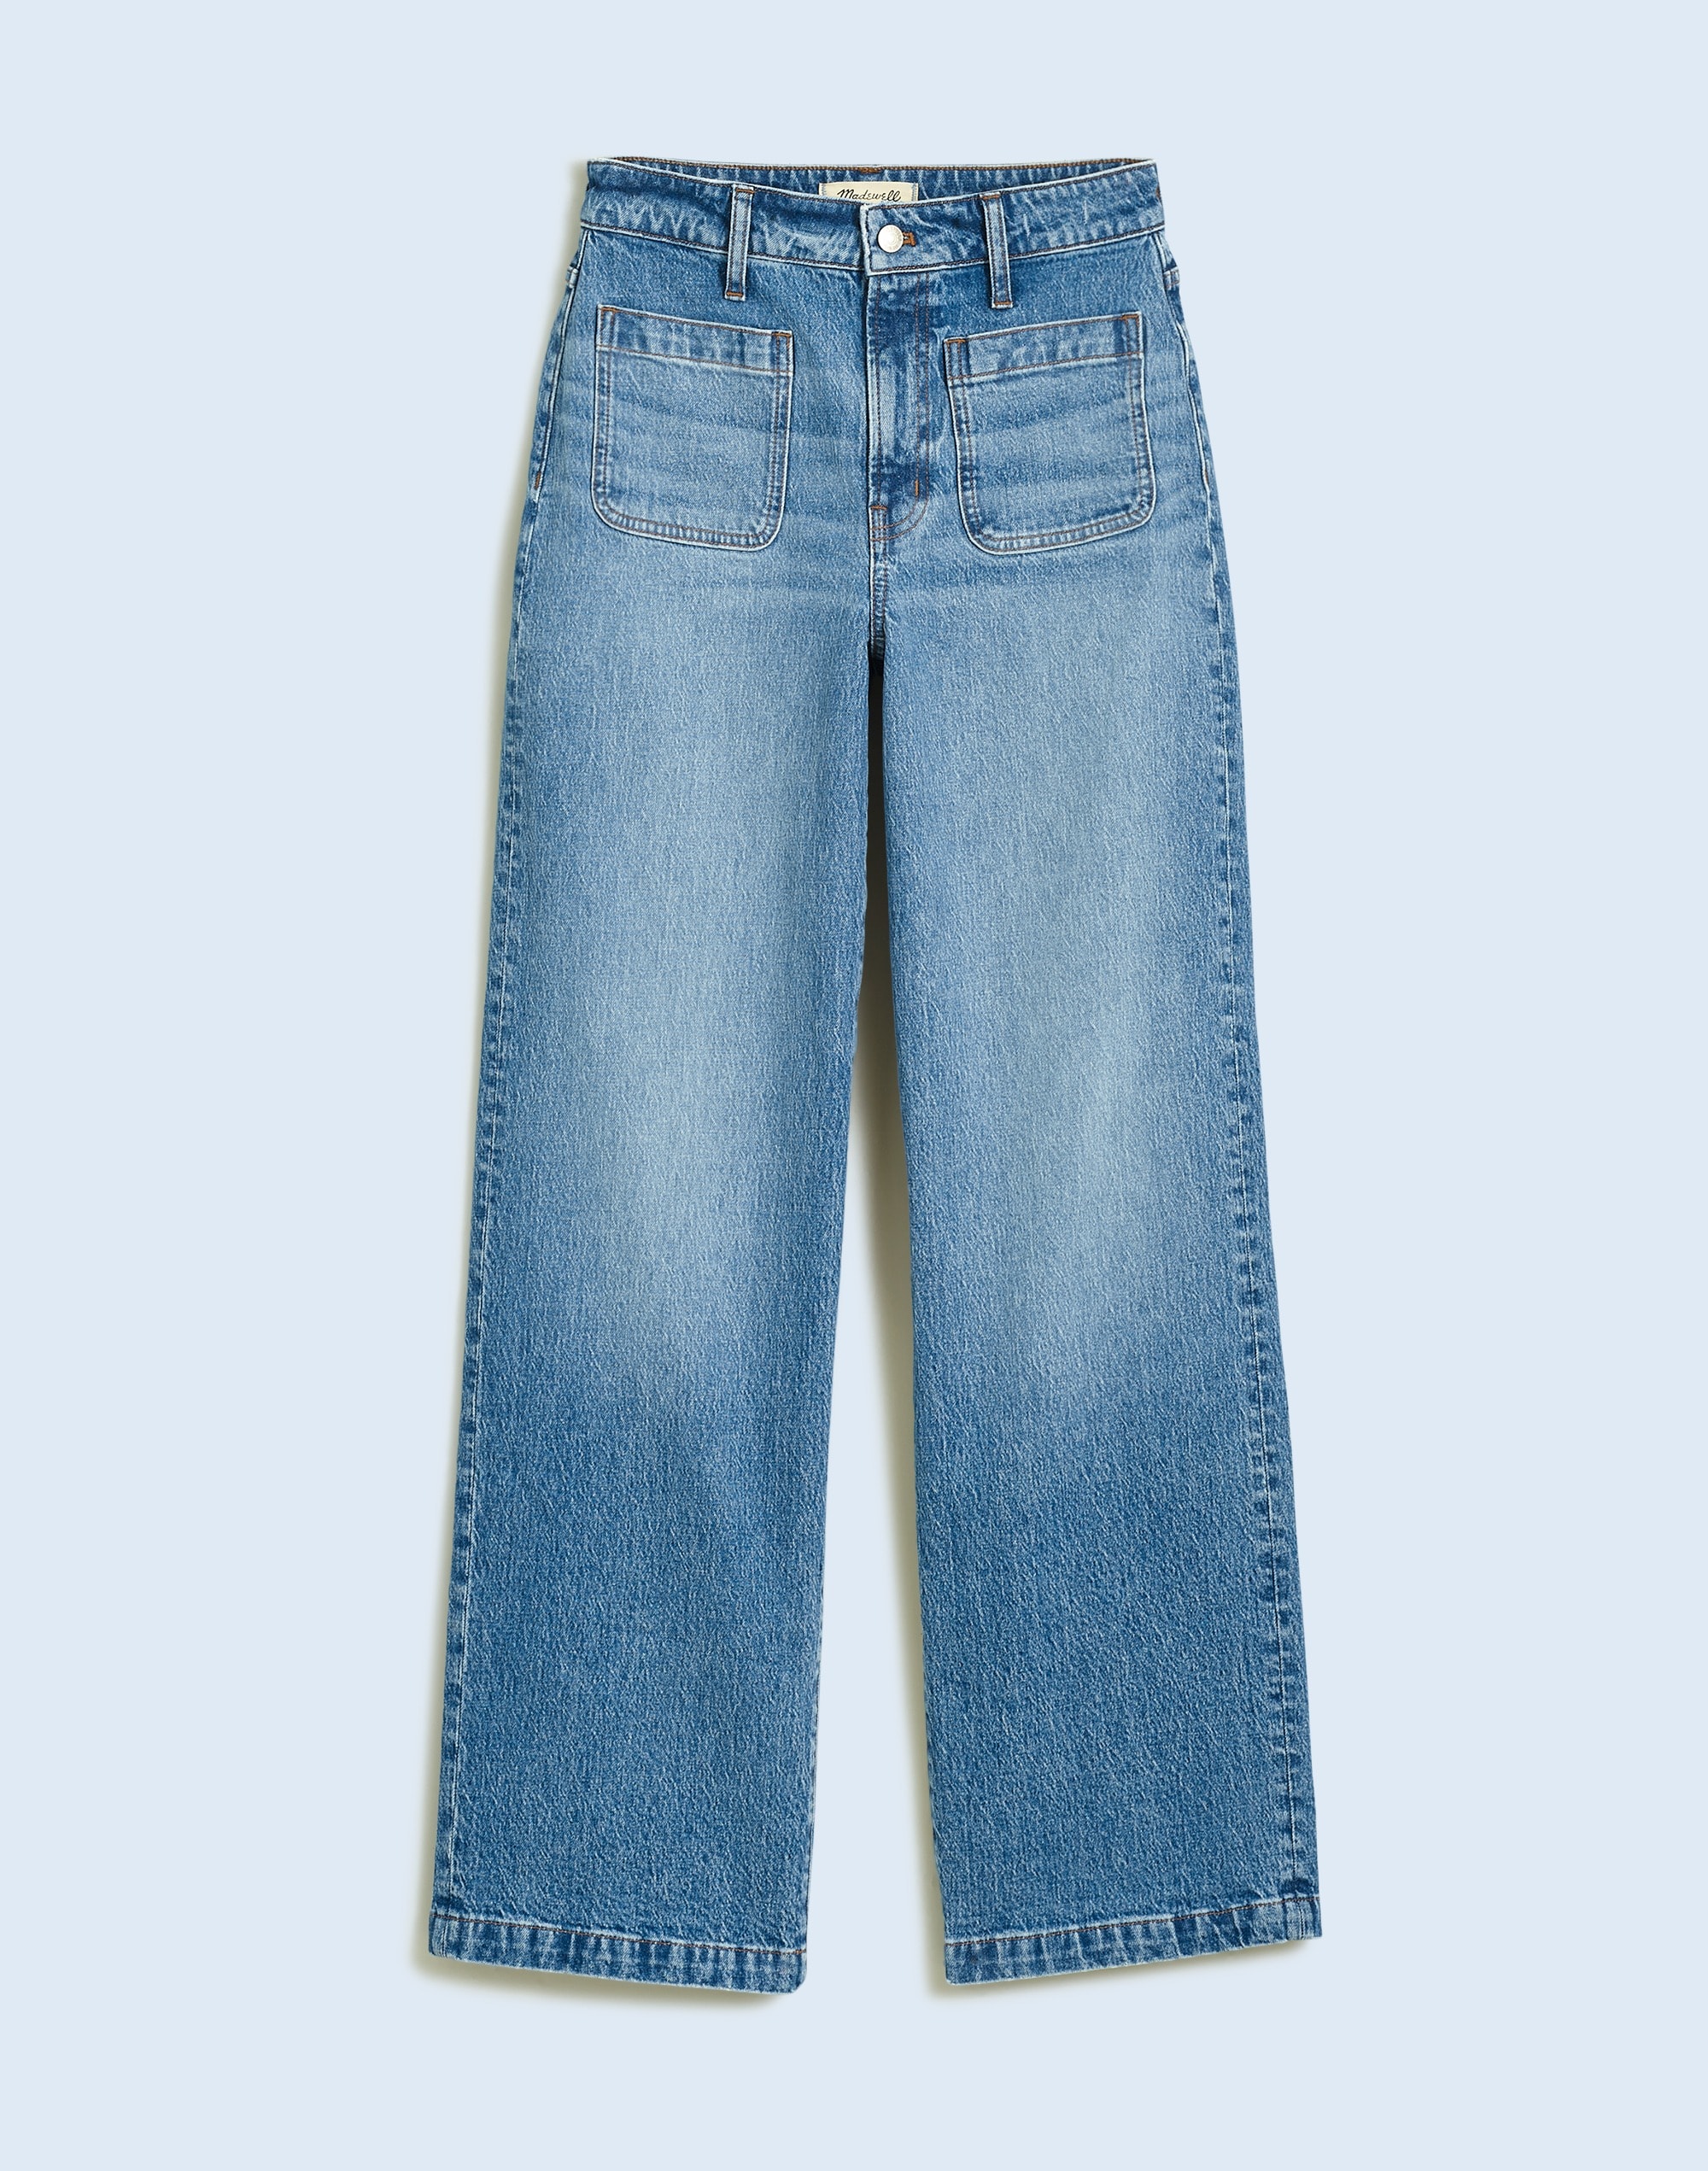 Uniqlo Wide Flared Jeans In Light Washed Color Sz 12